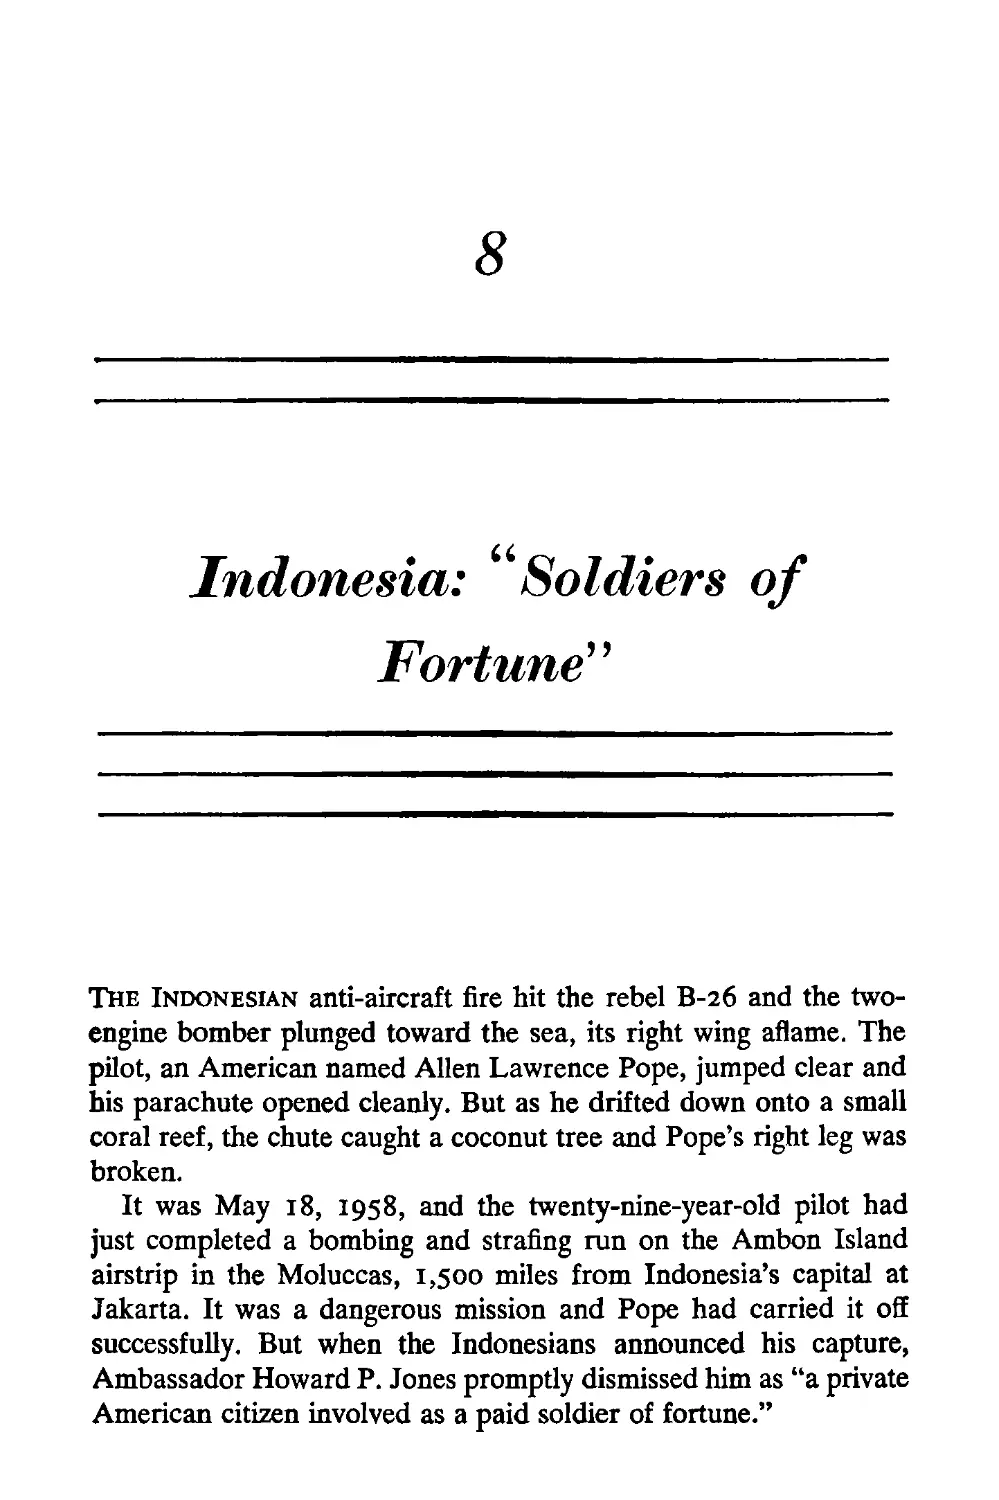 8. Indonesia: “Soldiers Of Fortune”